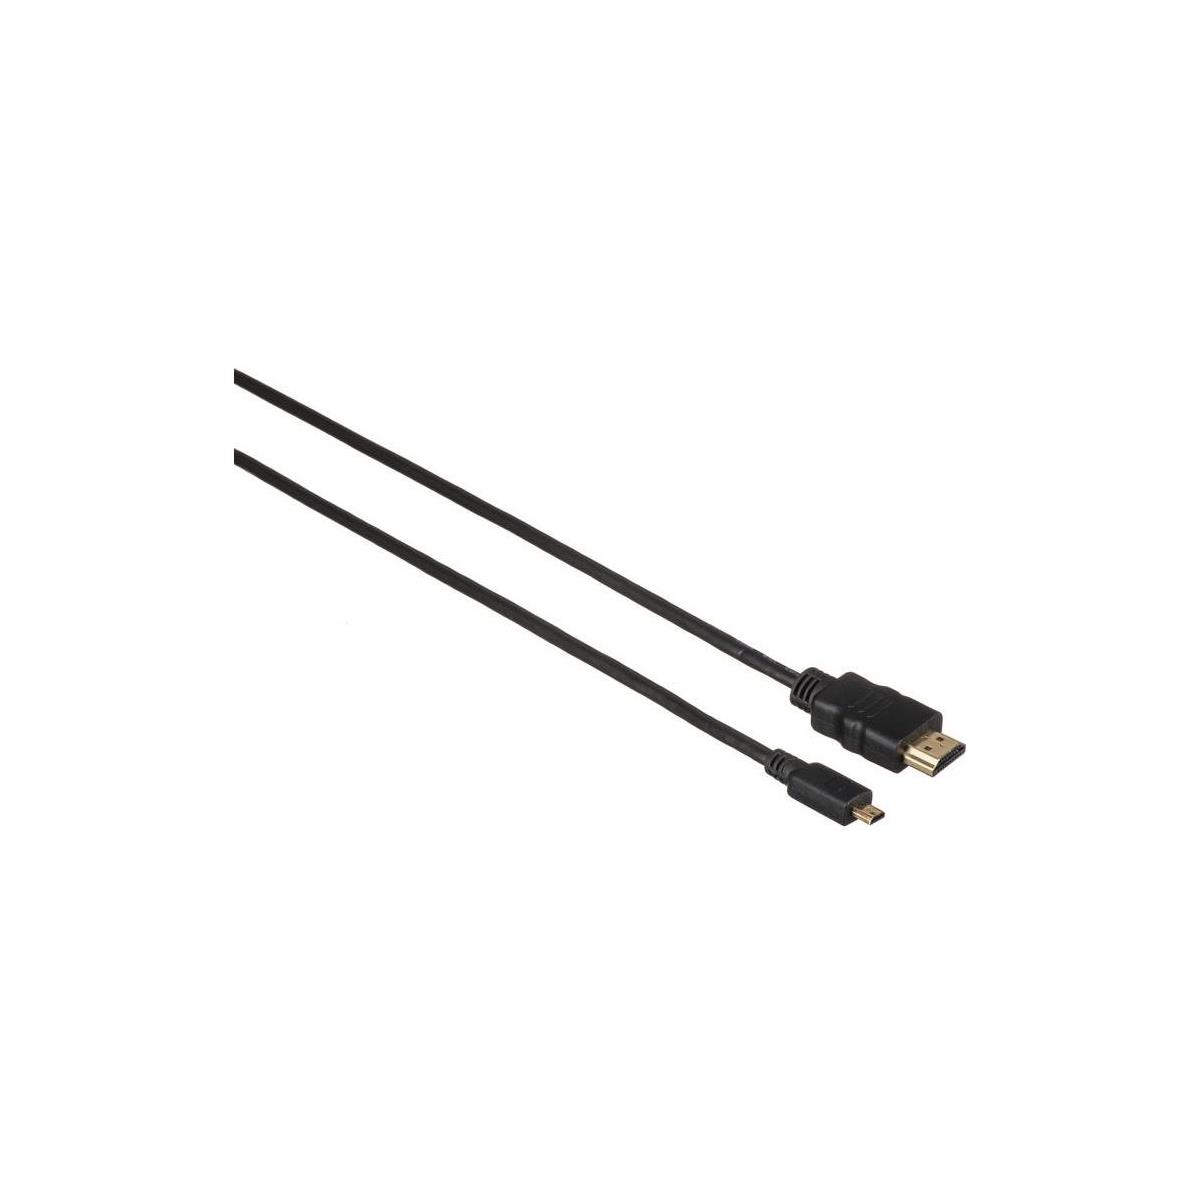 Image of Kramer Electronics C-HM/HM/A-C High-Speed HDMI (M) to Mini HDMI (M) Cable 